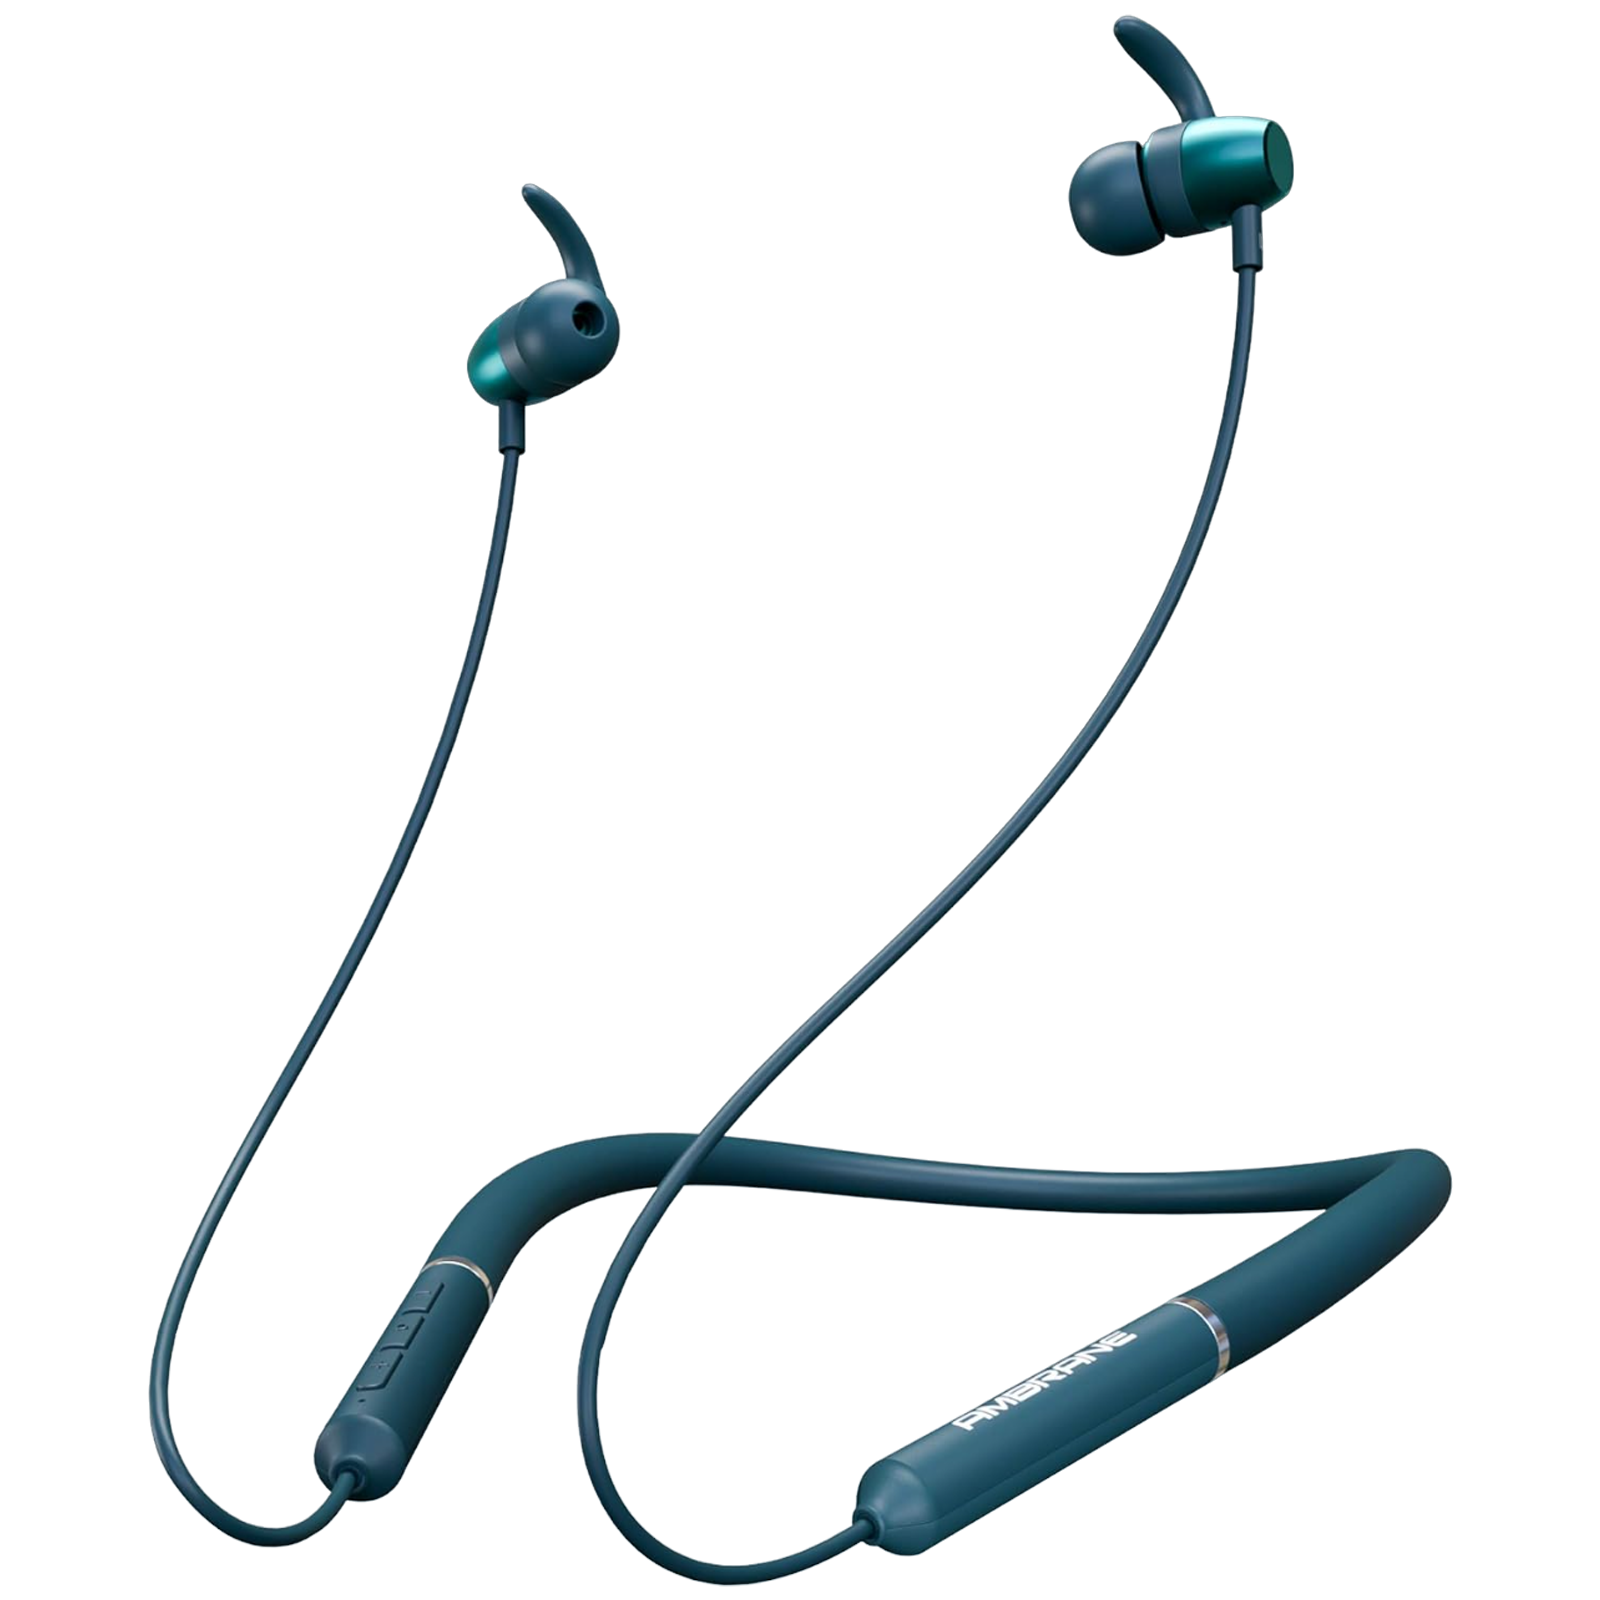 ambrane Bass Band Pro Neckband (IPX5 Water Resistant, Fast Charging, Teal Blue)